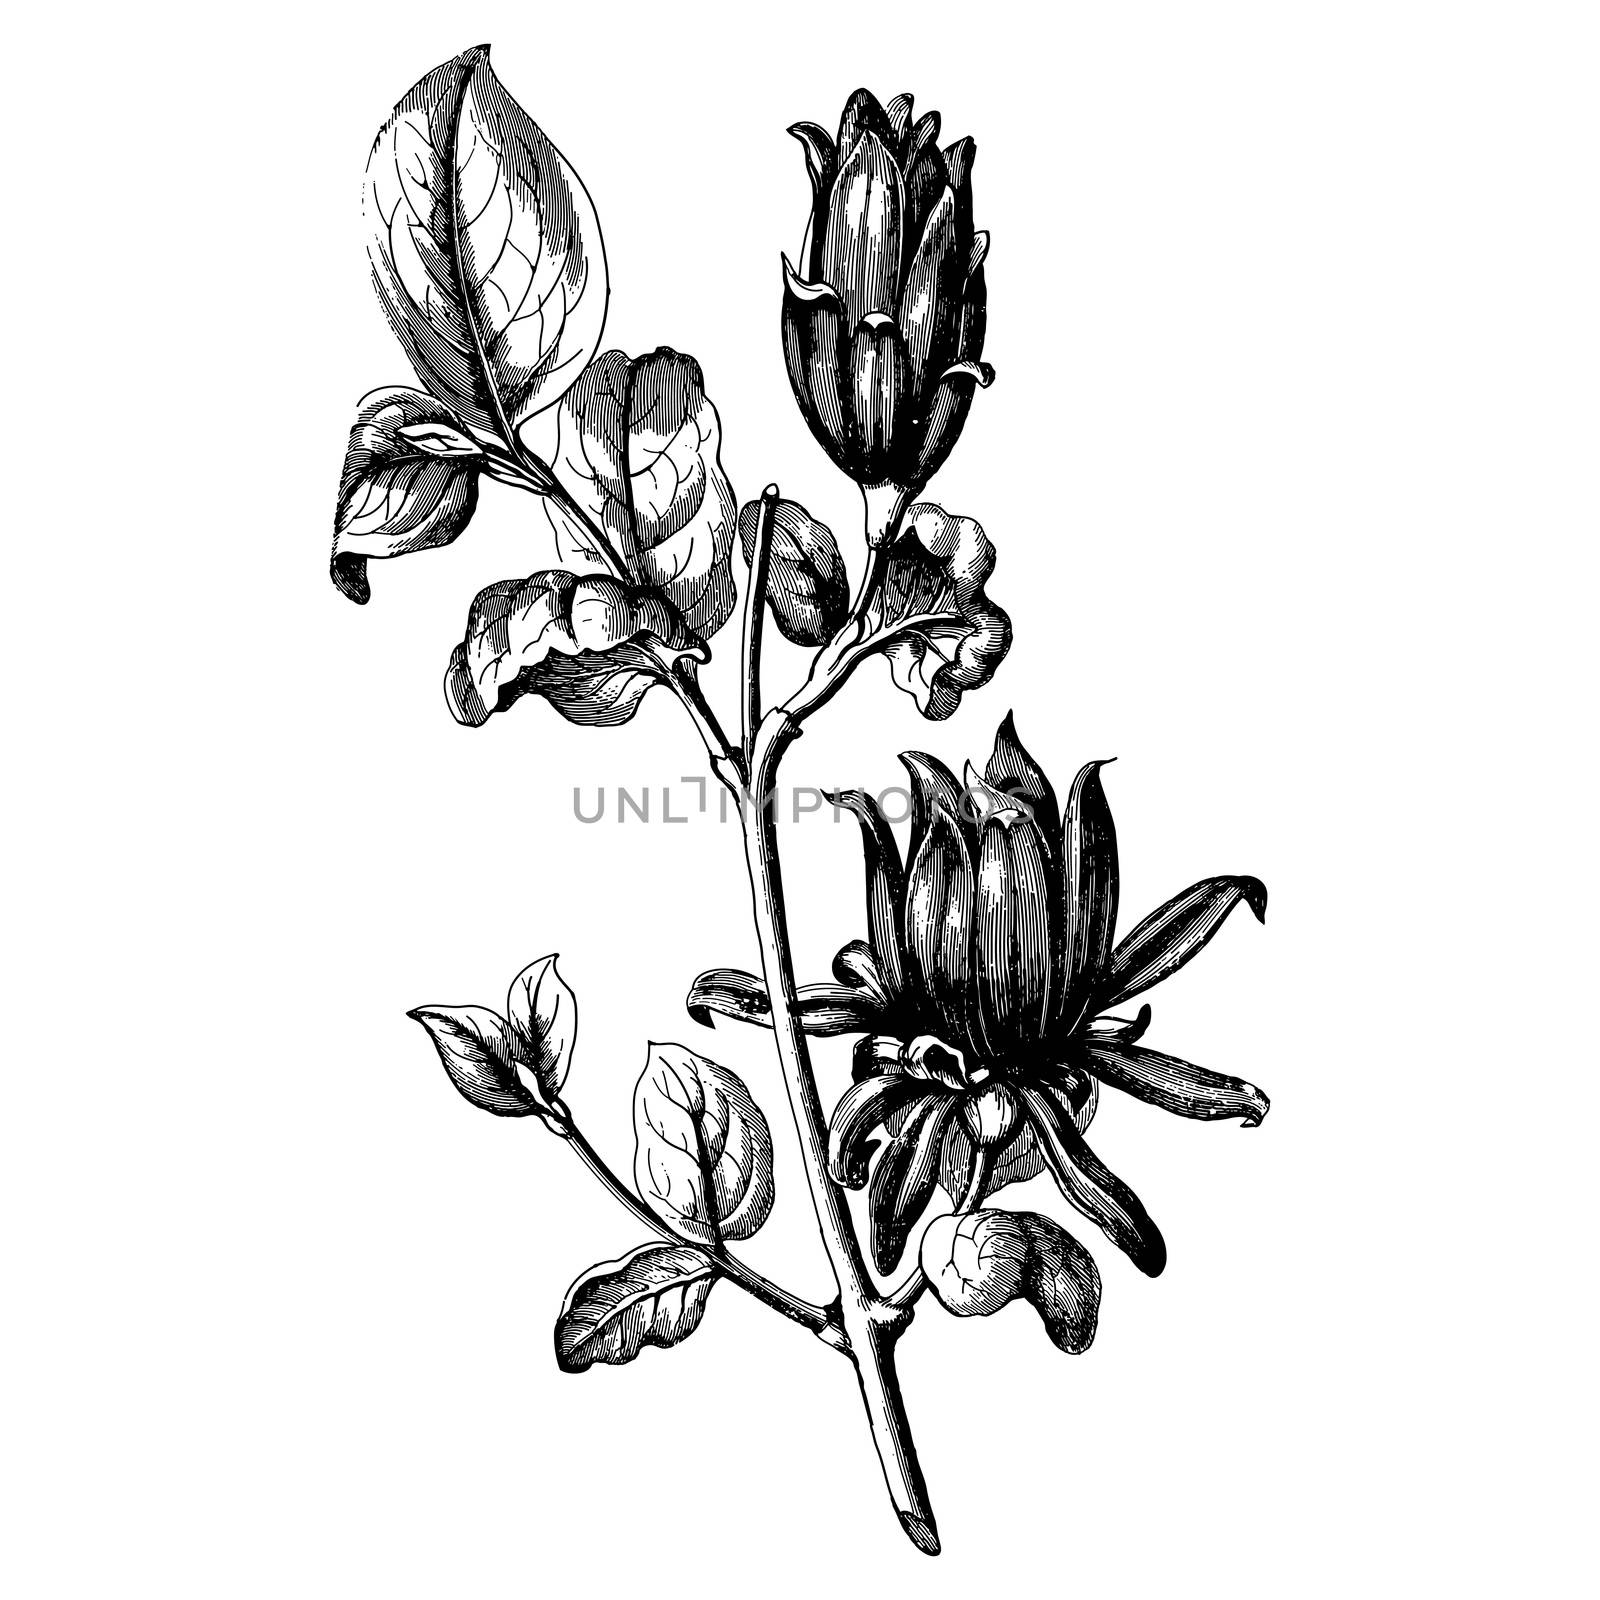 Vintage etching vector illustration of a bouquet of flowers